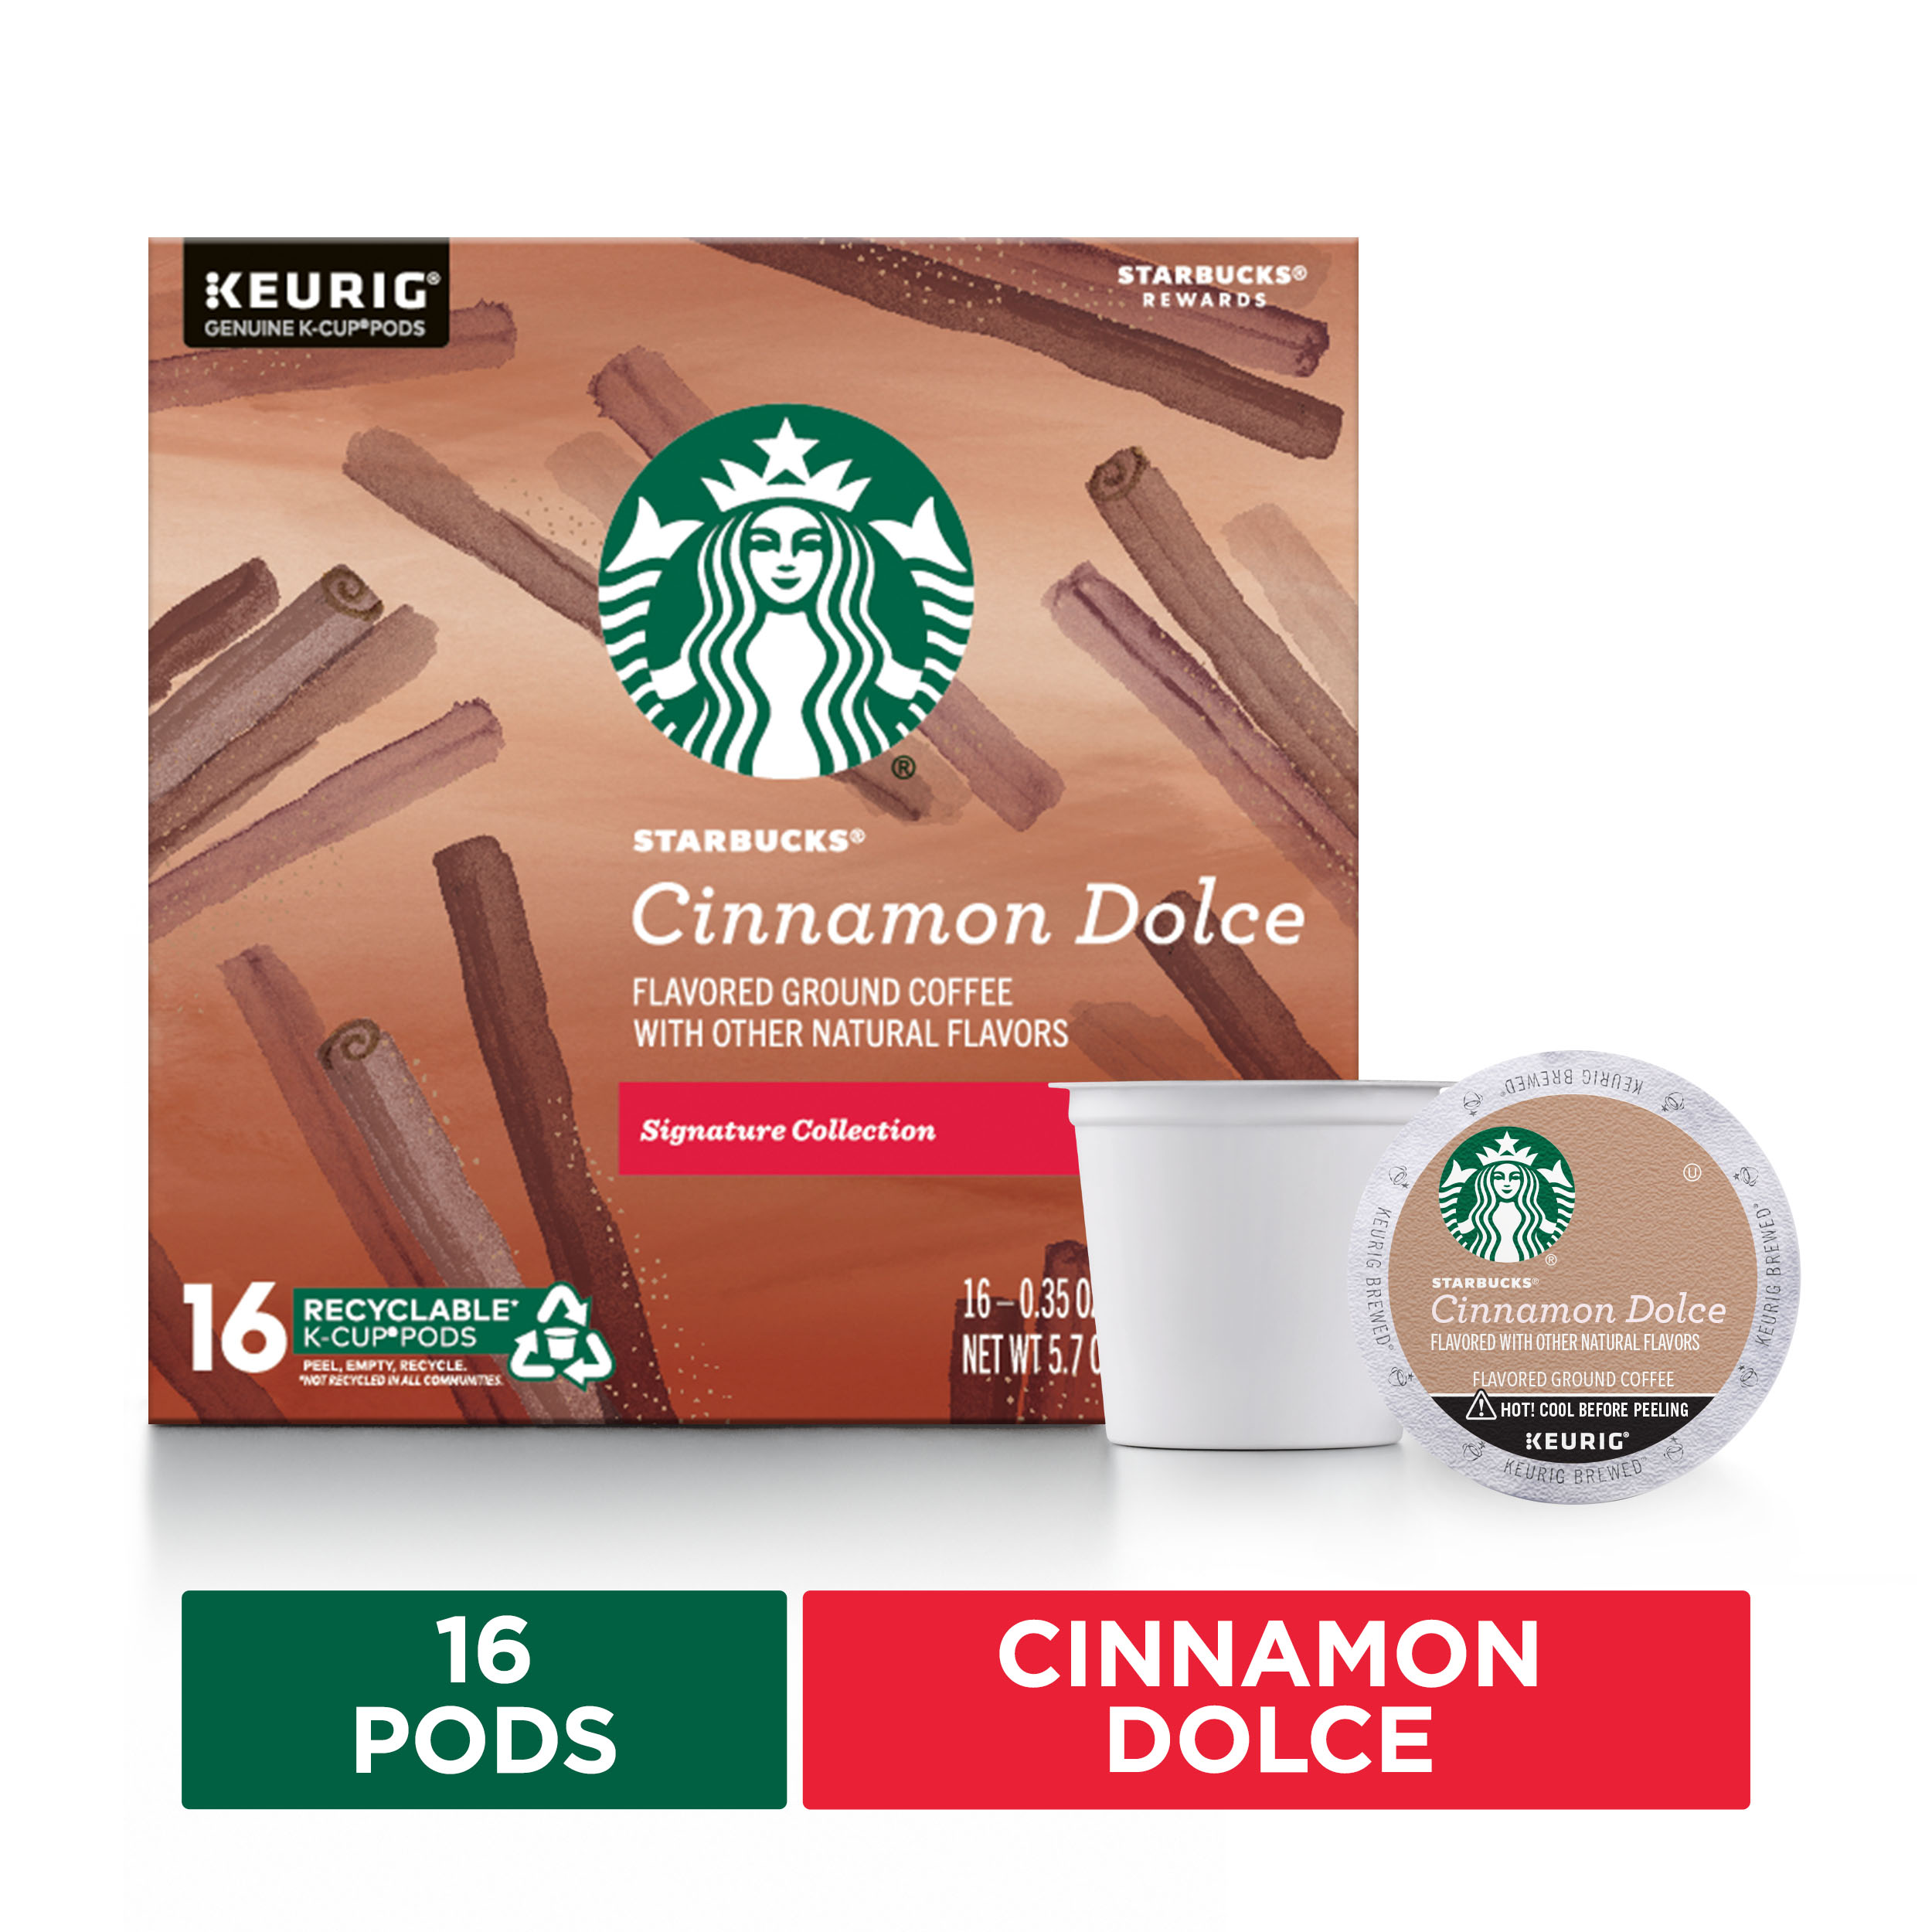 Starbucks Blonde Roast K-Cup Coffee Pods — Cinnamon Dolce for Keurig Brewers — 1 box (16 pods) - image 1 of 6